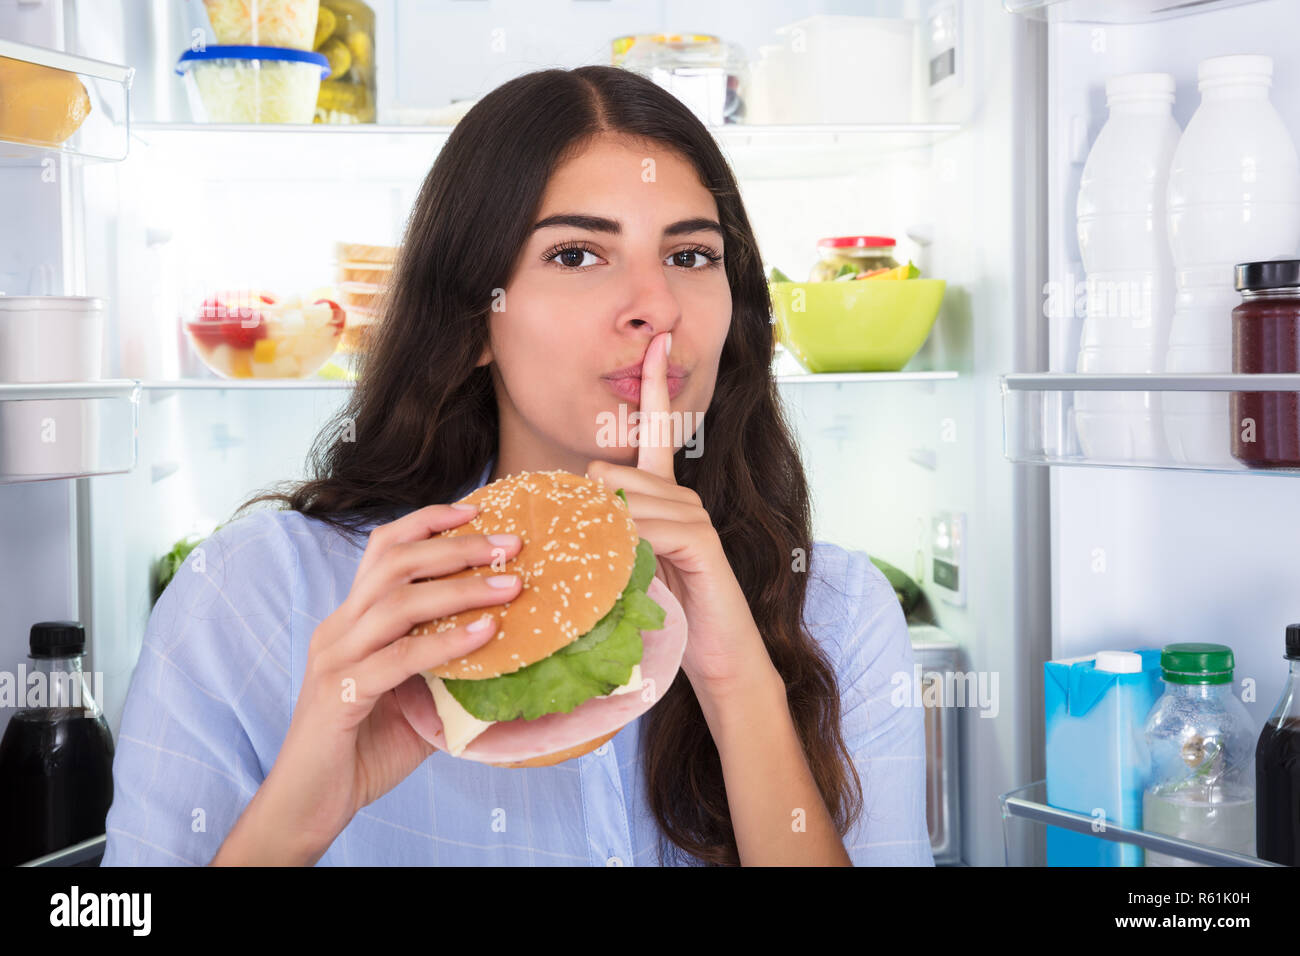 Woman Holding Burger With Finger On Lips Stock Photo